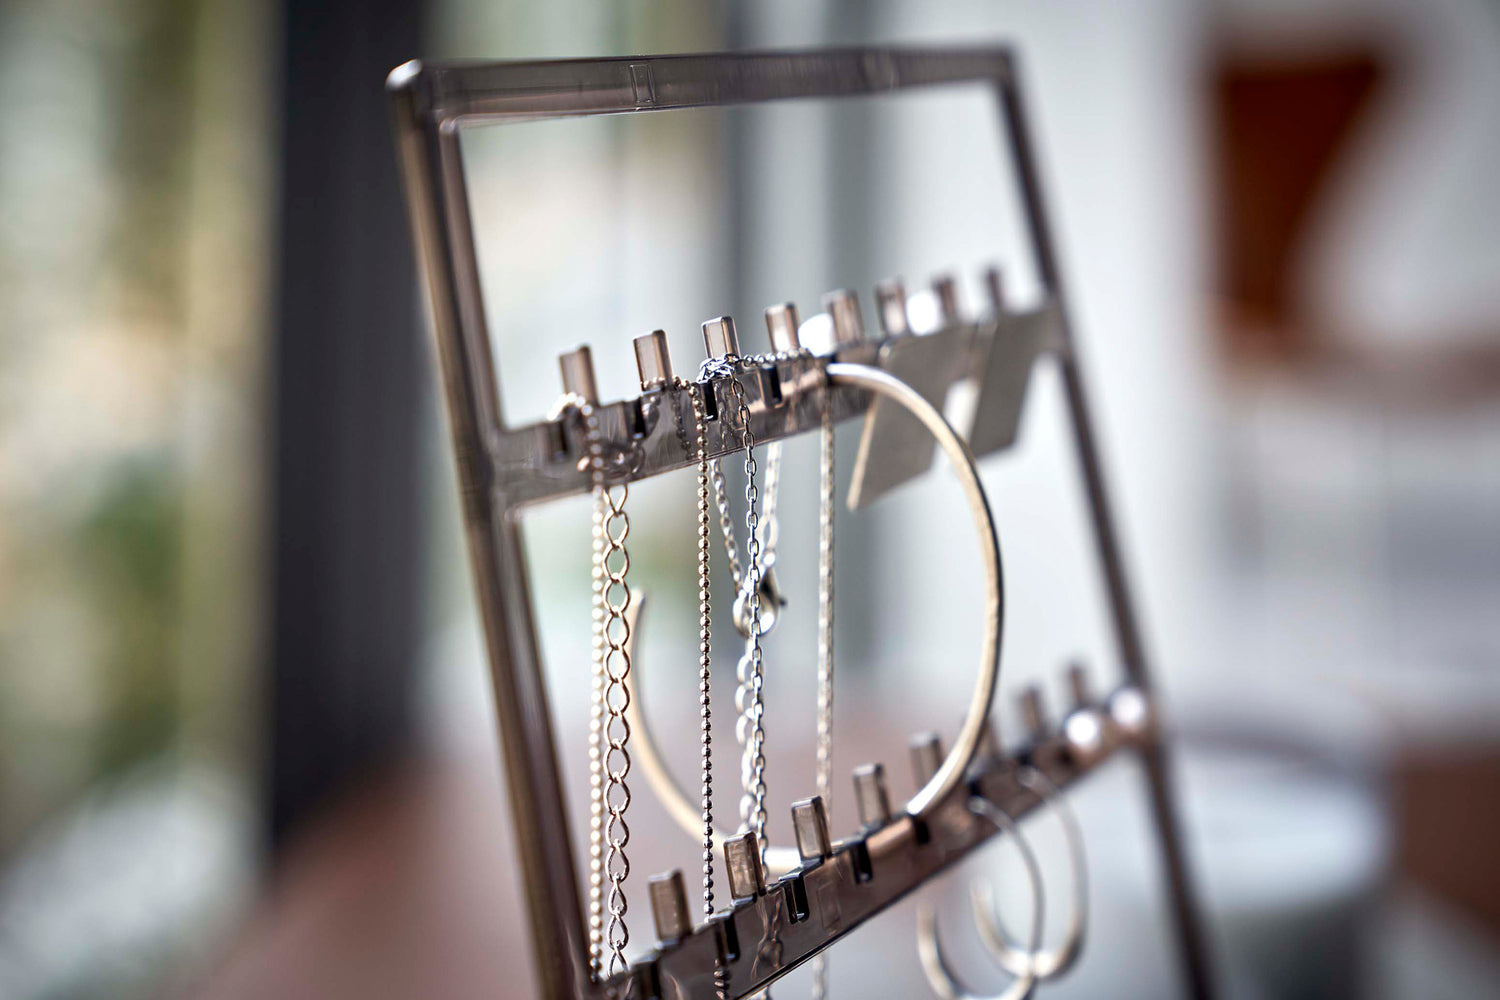 View 12 - A detailed view of an acrylic translucent mauve earring holder. The holder has upward pointed hooks and slots placed in an interchangeable pattern. Hanging from the hooks are chained necklaces, and in the slots are various earrings.